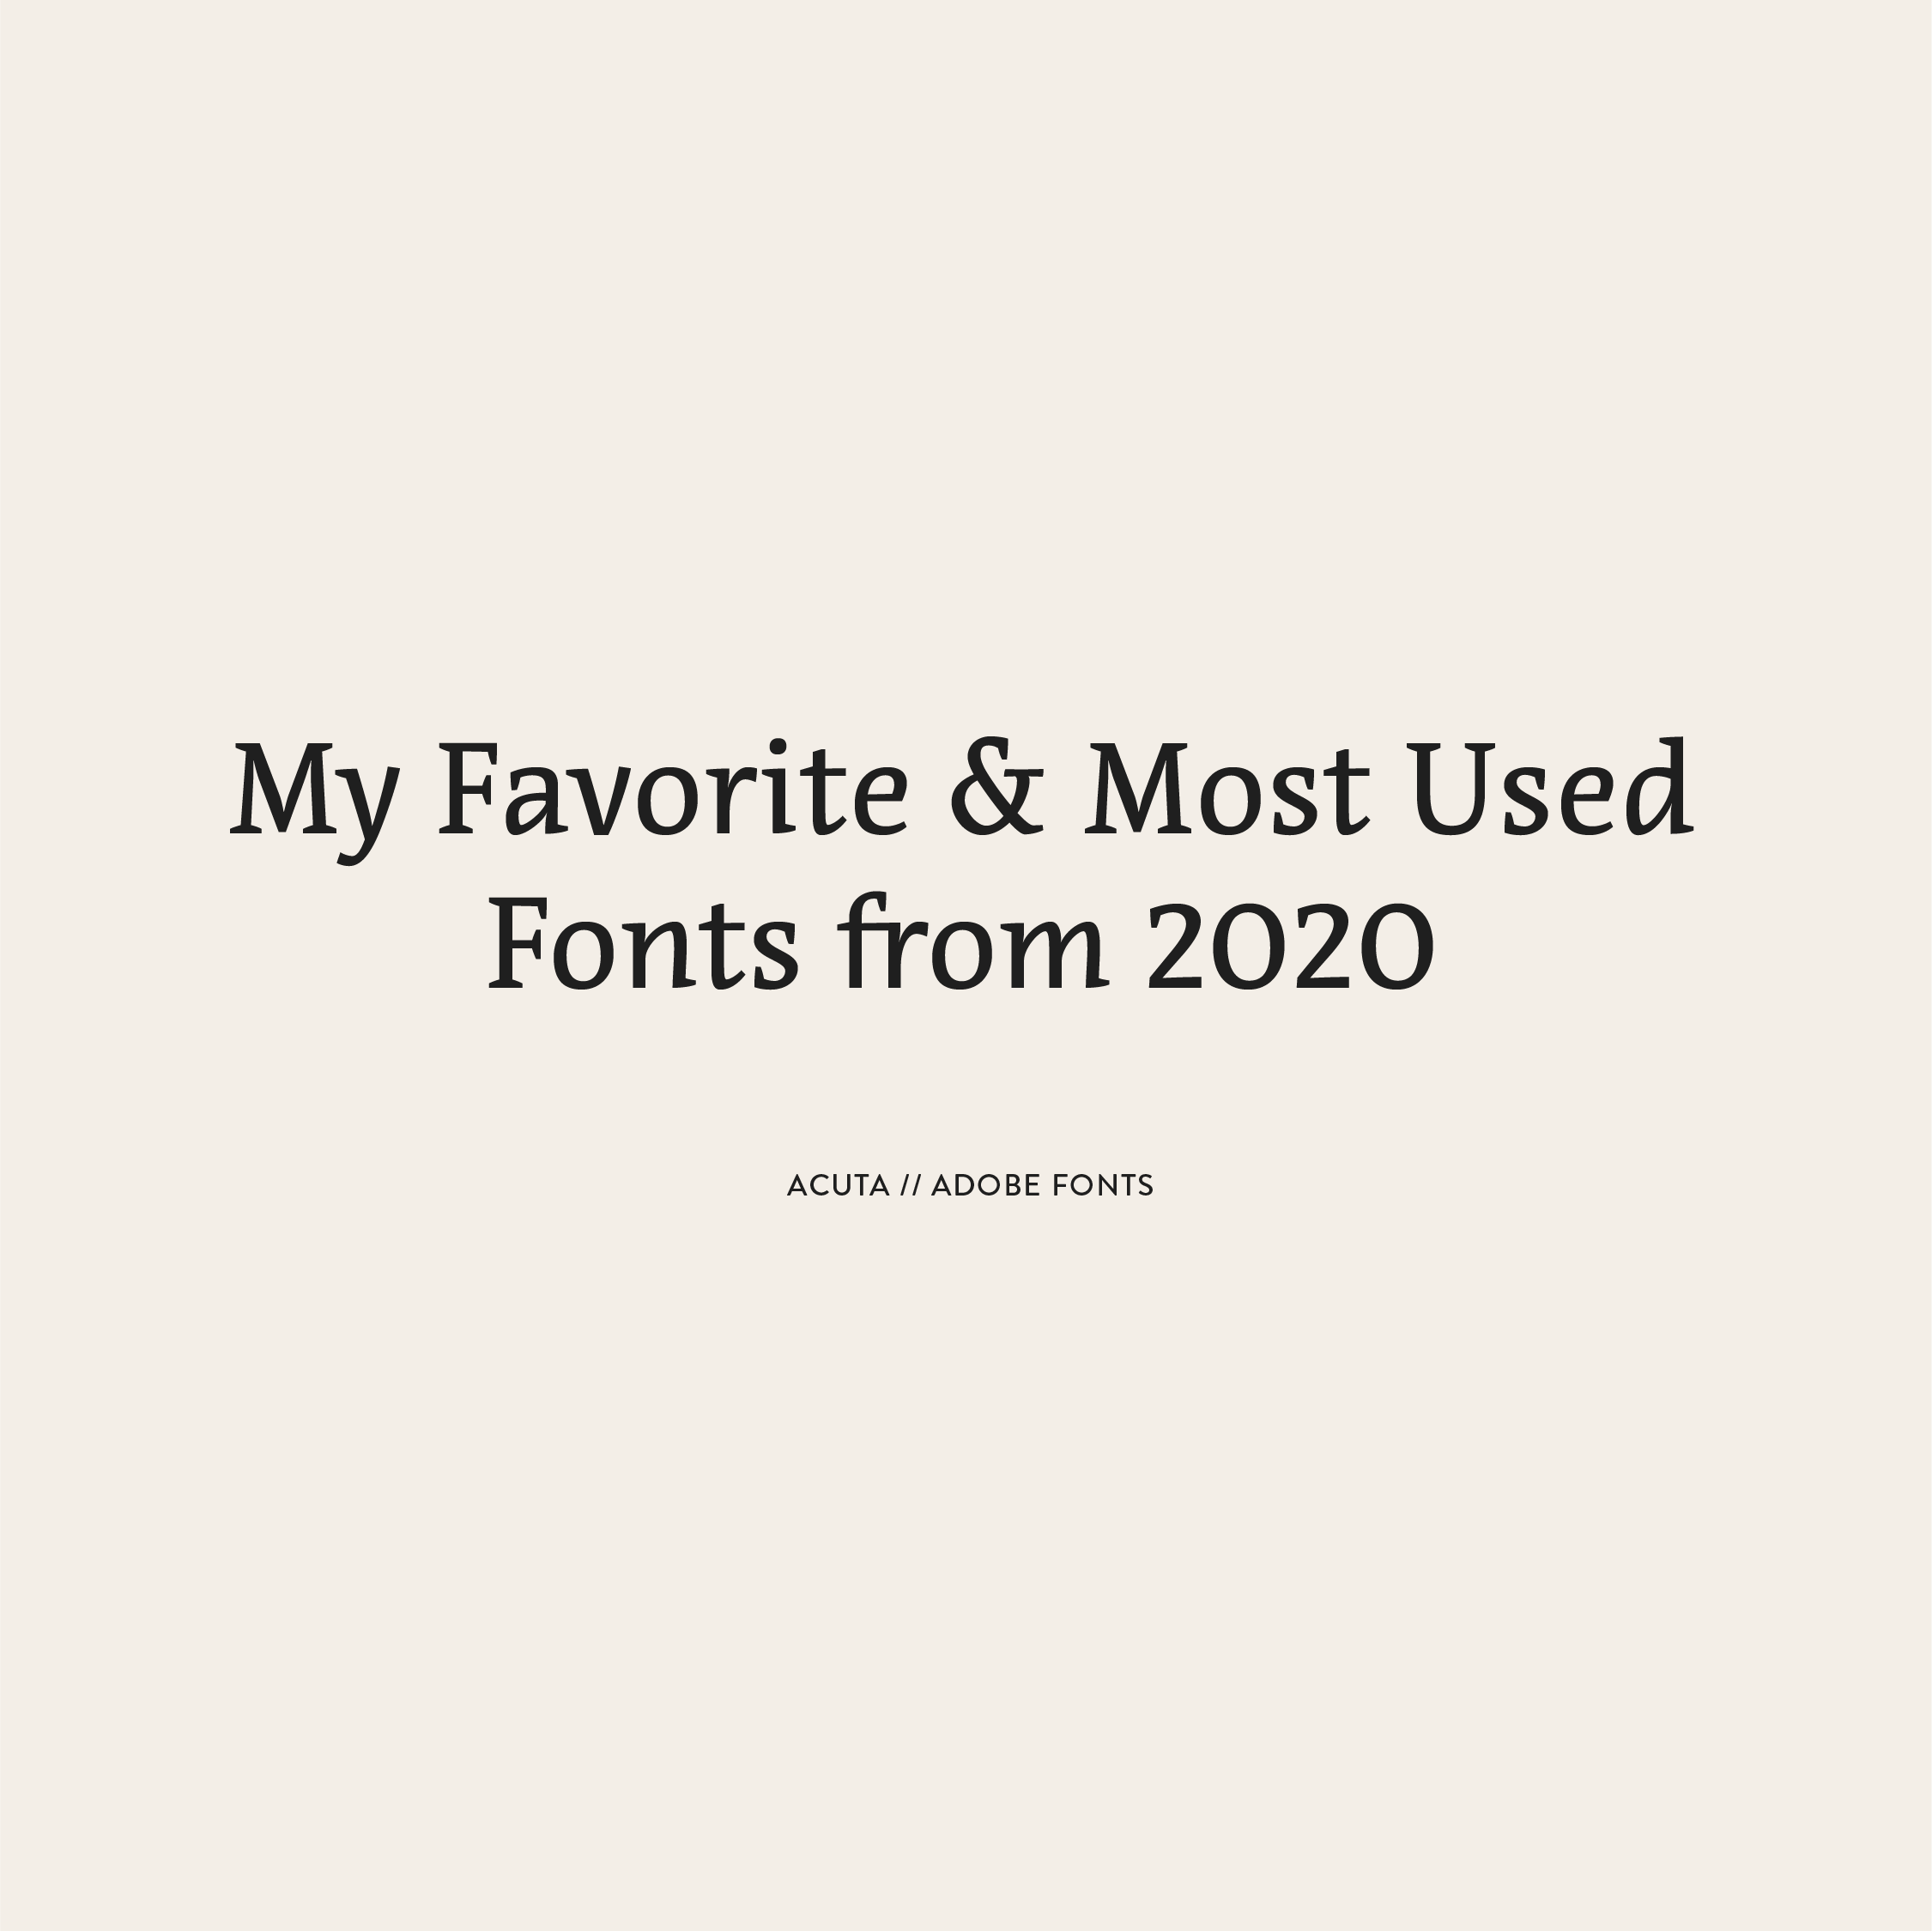 My favorite and most used fonts from 2020